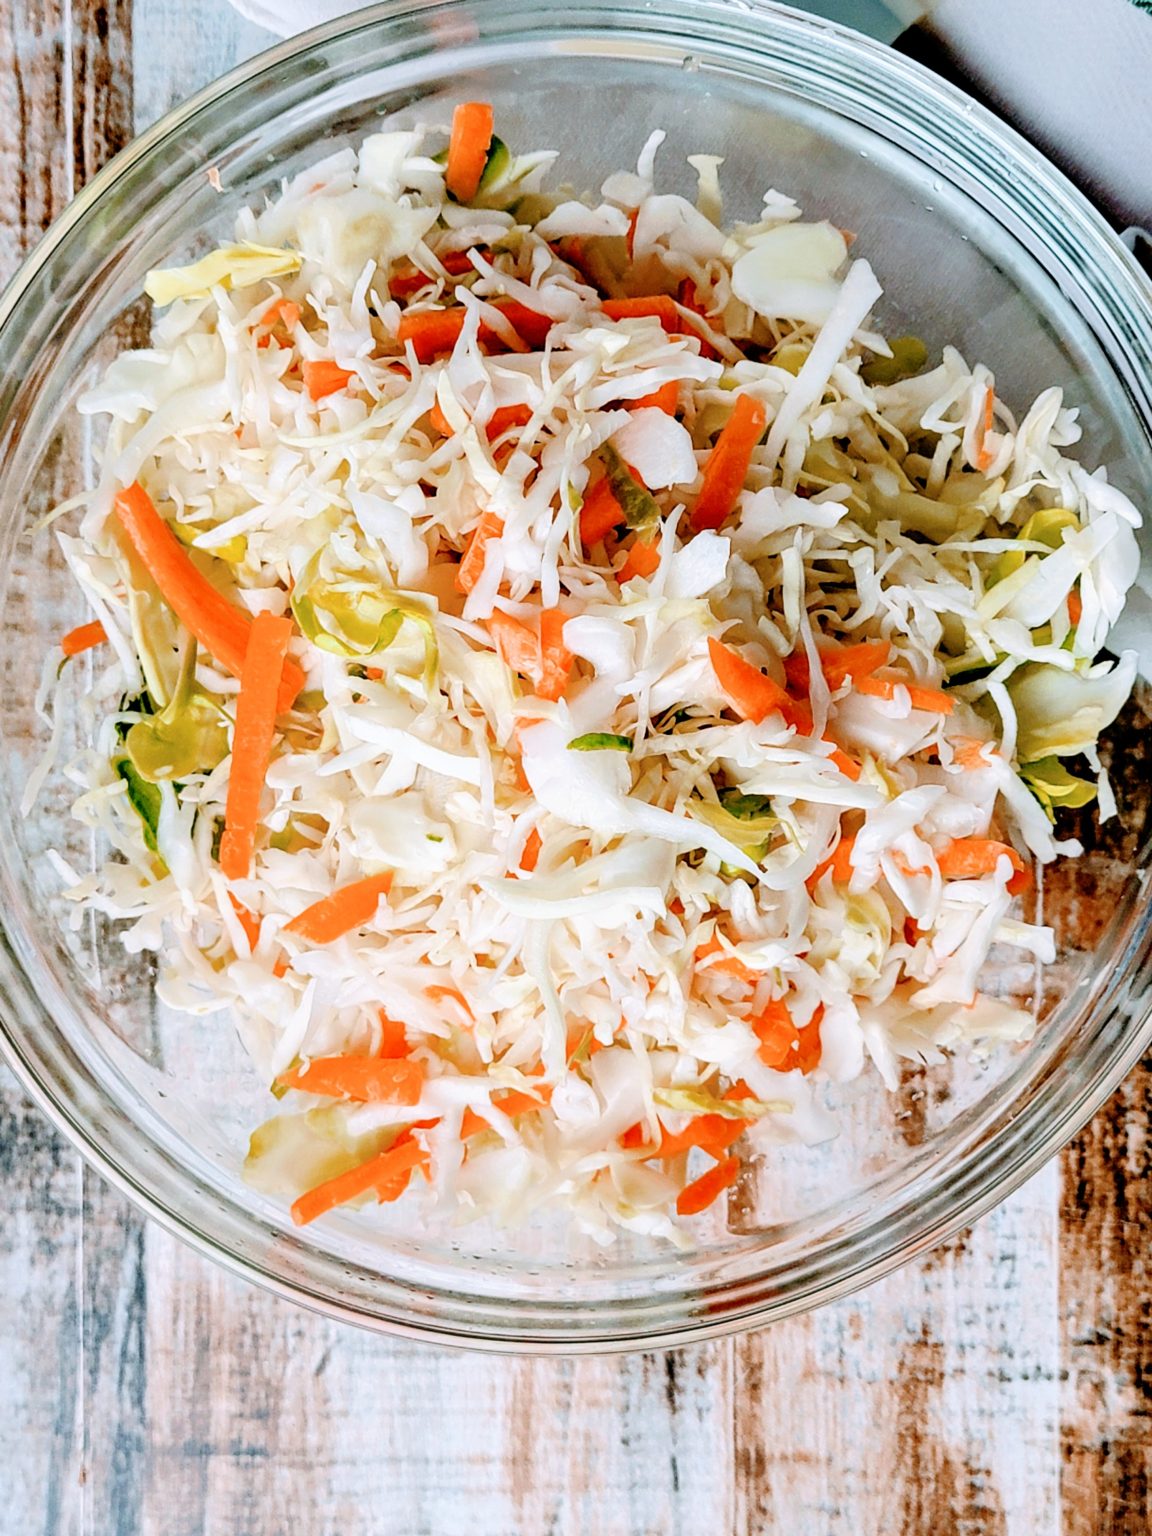 Shredded Cabbage And Carrots 1152x1536 